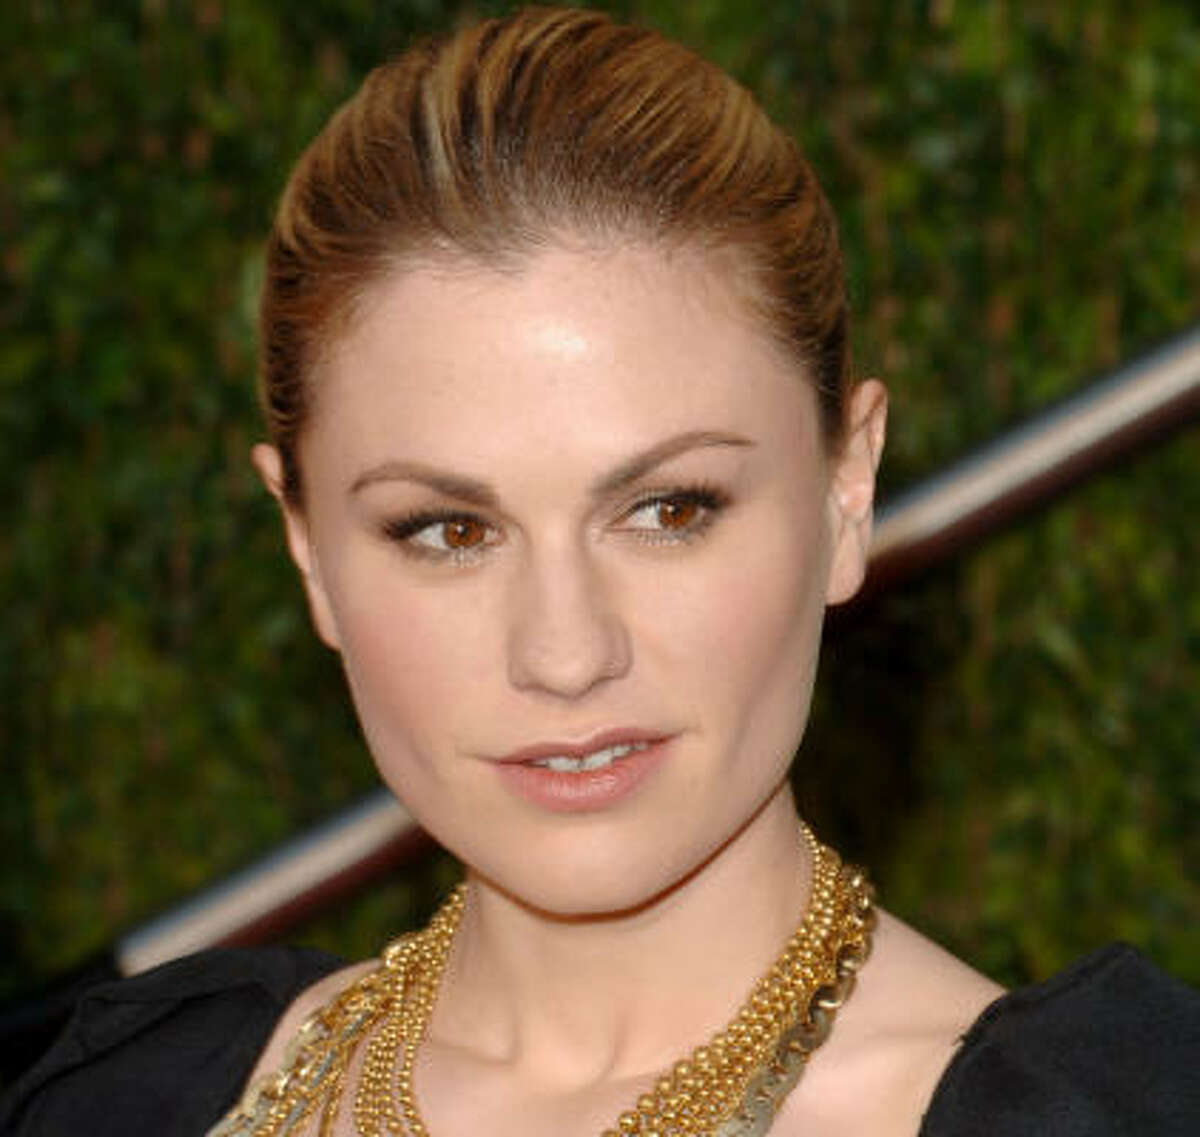 'Out' gay celebrities Keep clicking to learn more about this Oscar winner and others. Anna Paquin : In an ad campaign for Cyndi Lauper's True Colors Fund, which fights for the rights of the GLBT community, Paquin declares, "I'm Anna Paquin. I'm bisexual, and I give a d*mn."